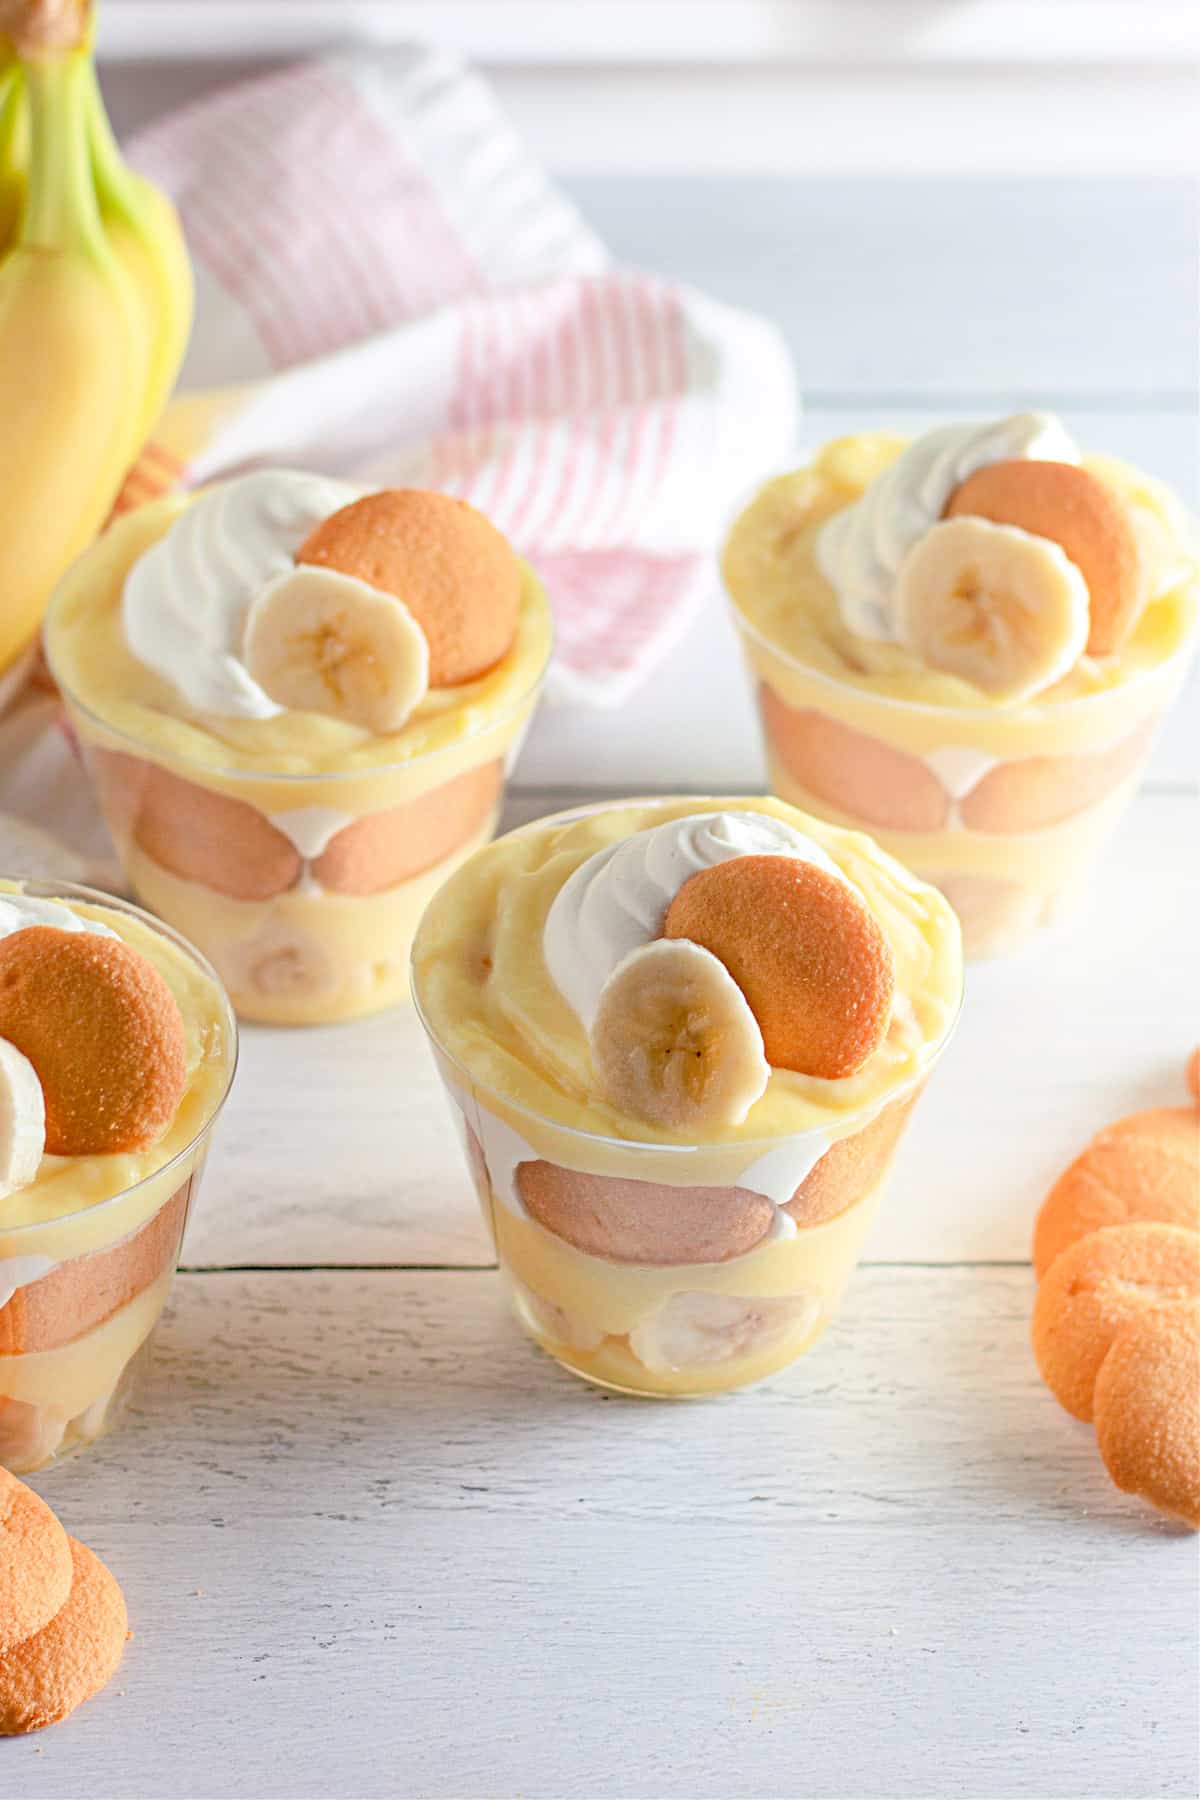 Rows of banana pudding cups on a table.